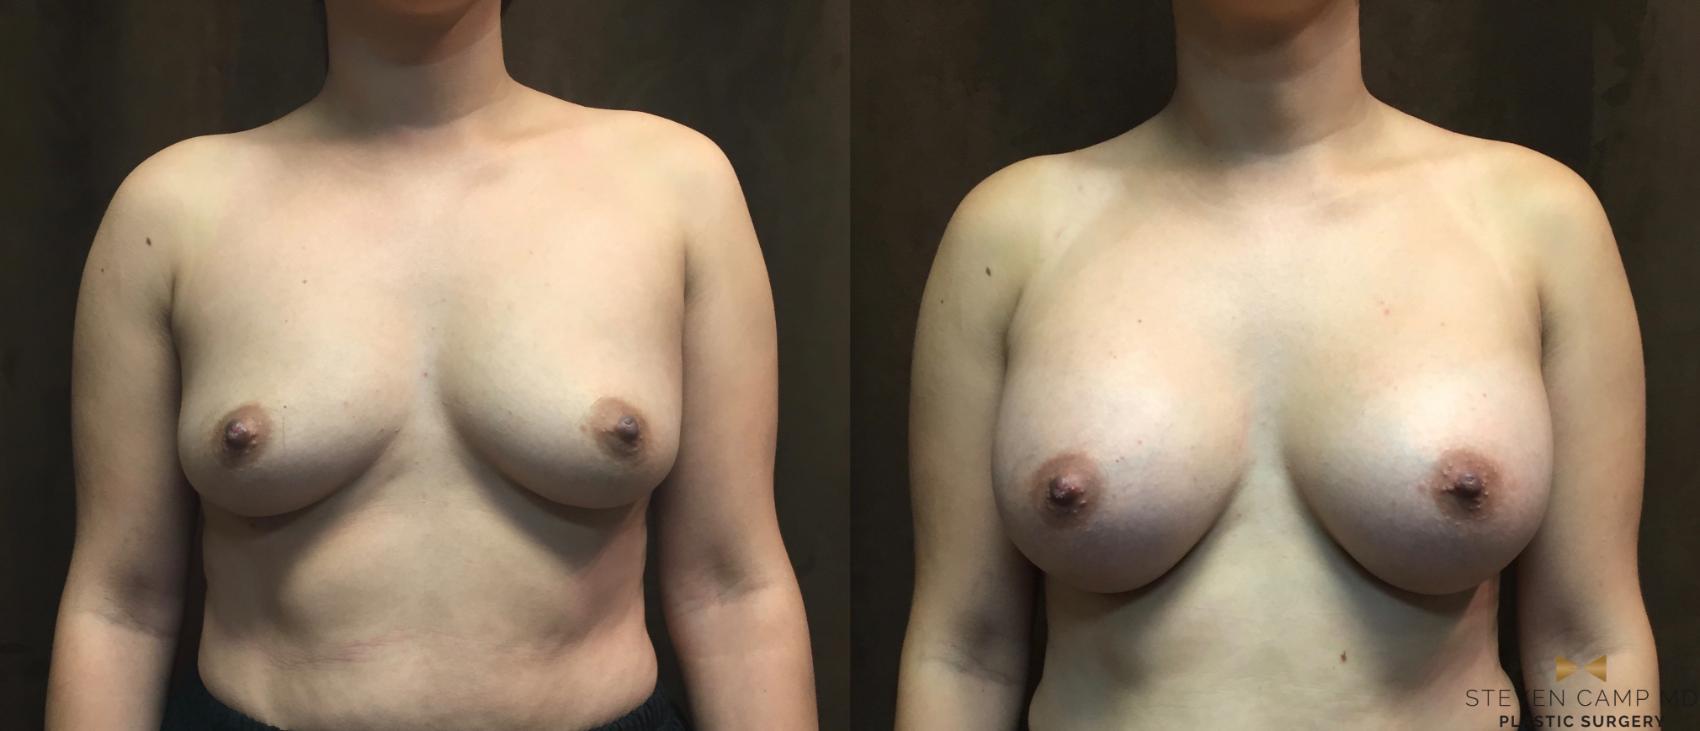 Before & After Case2926 by Steven Camp MD Plastic Surgery & Aesthetics, in Fort Worth